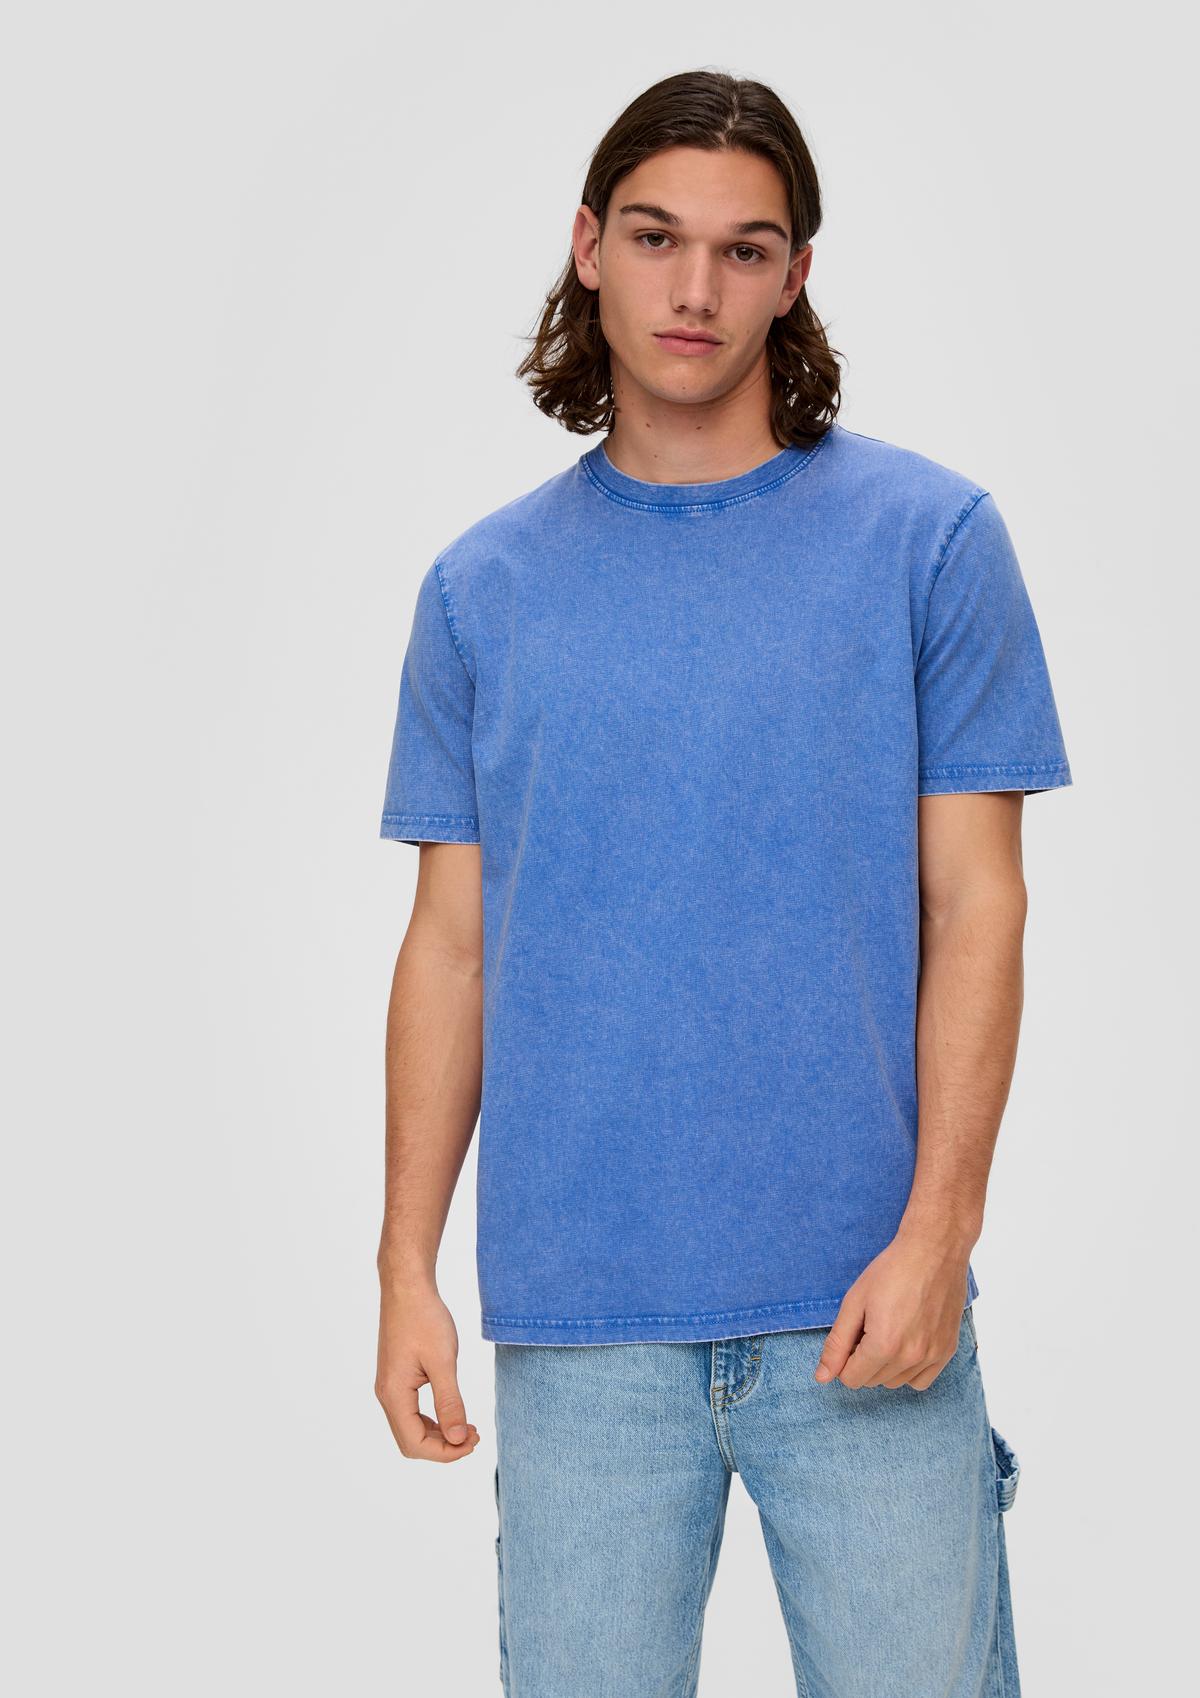 s.Oliver Garment-dyed cotton top